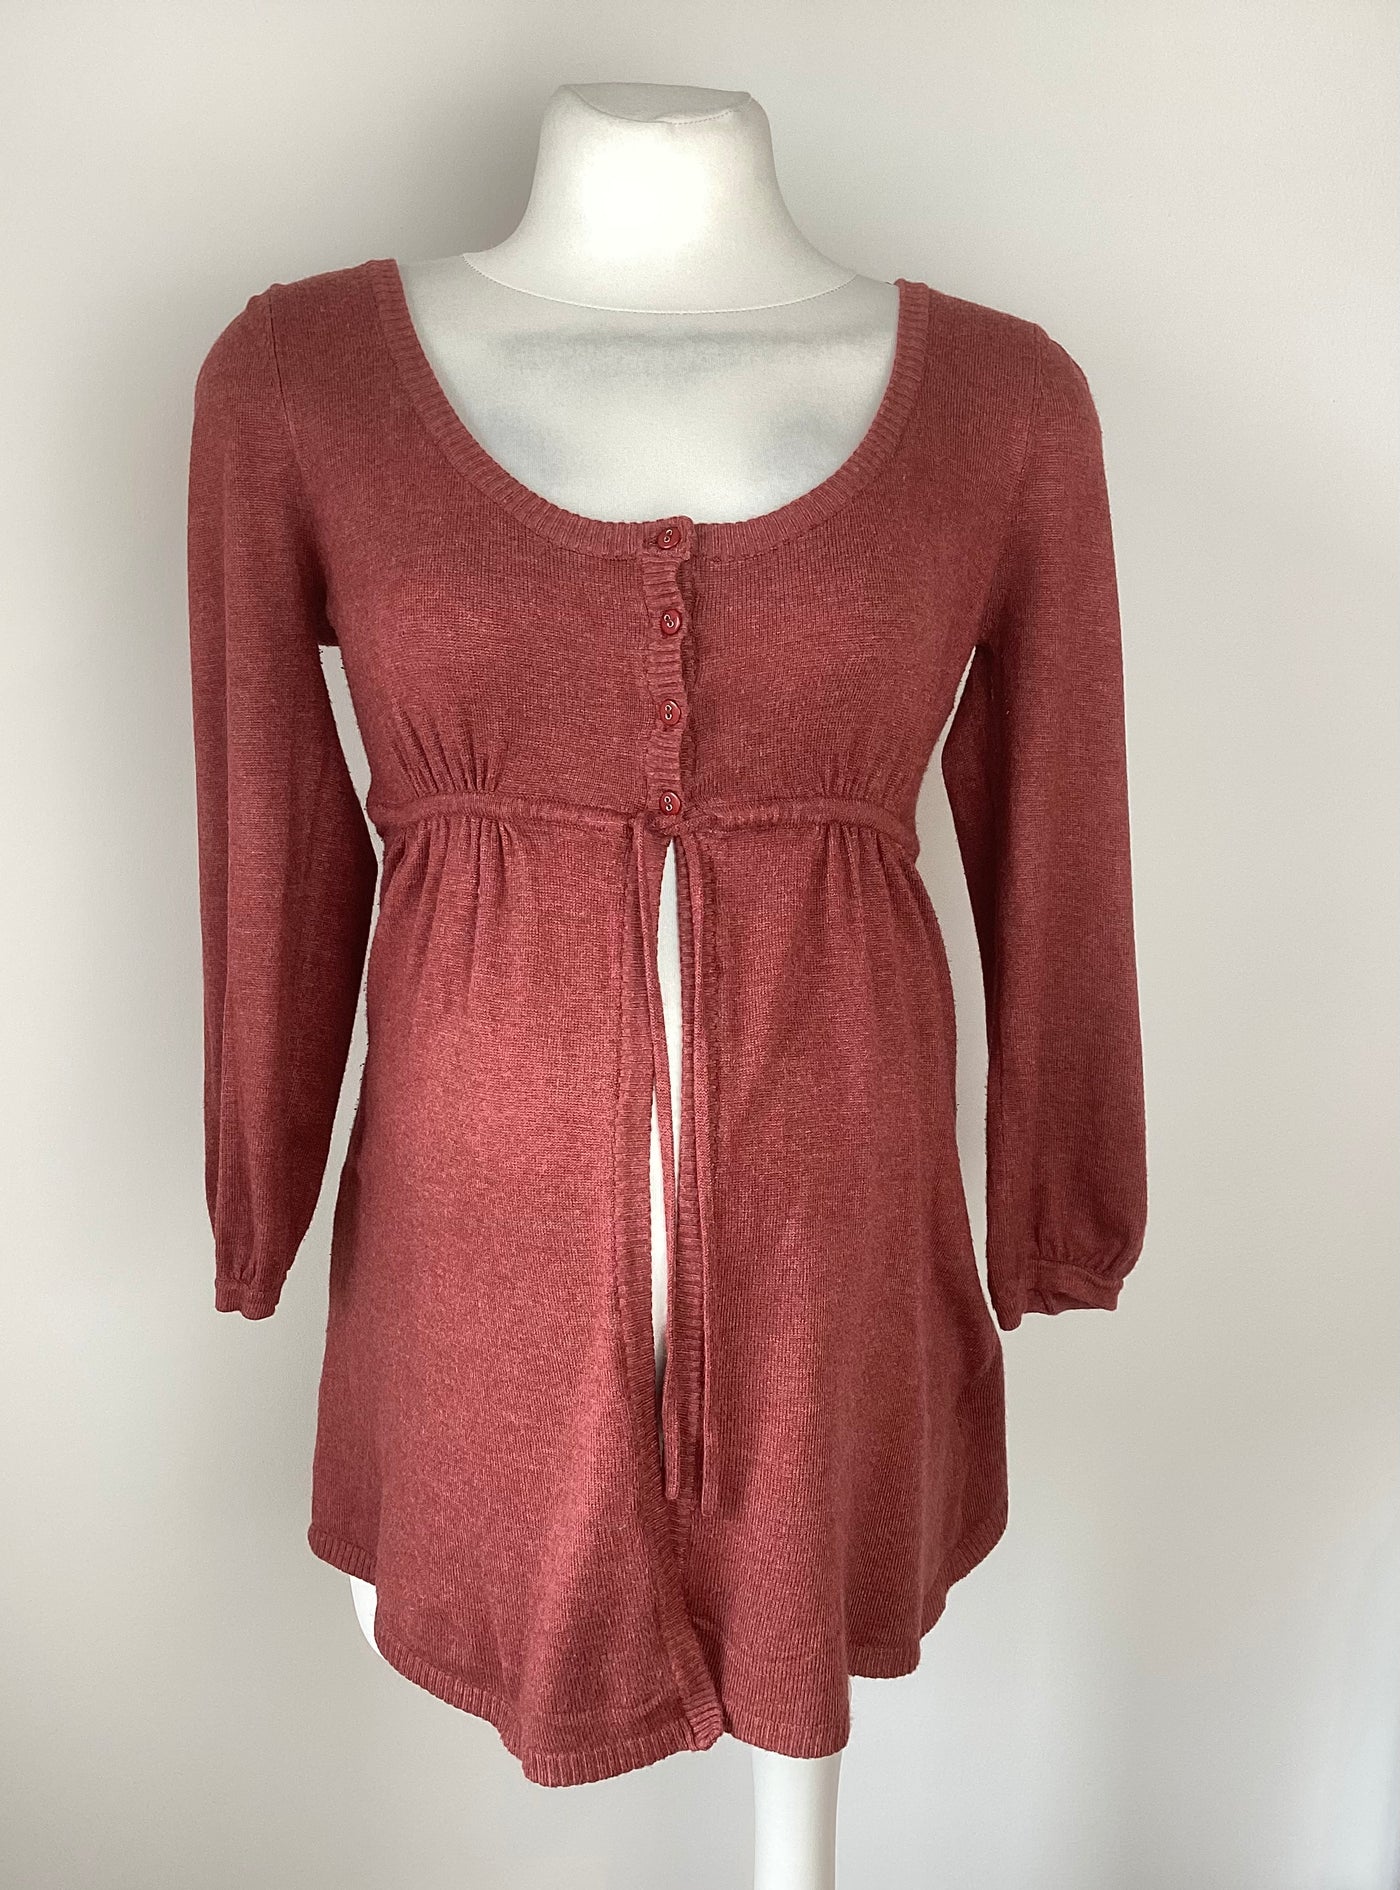 New Look Maternity rust cardigan with 3/4 sleeves and waist tie - Size 10